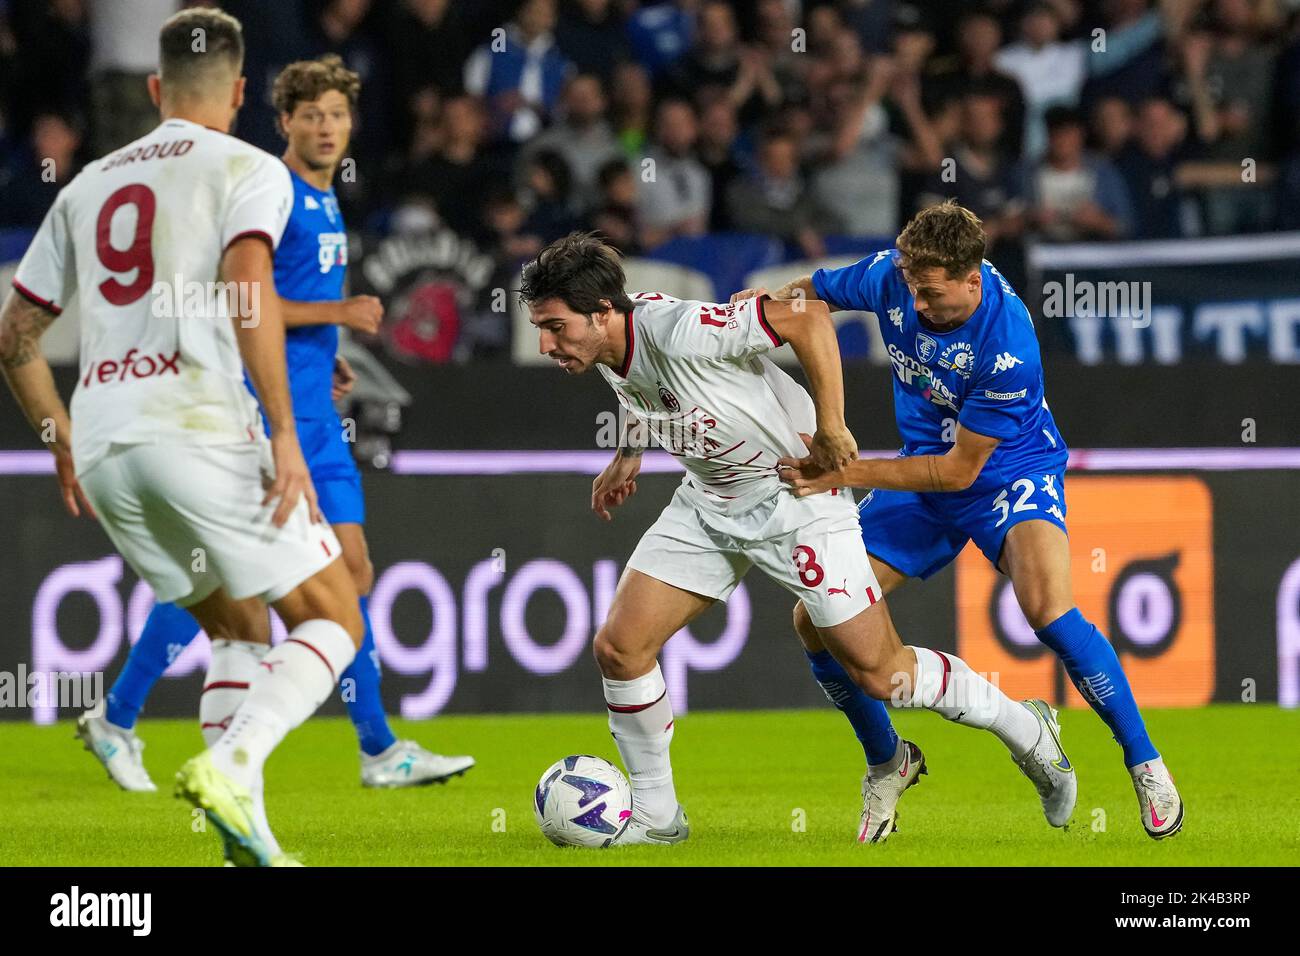 Empoli, Italy. 01st Oct, 2022. Sandro Tonali of AC Milan and Nicolas Haas of Empoli FC compete for the ball during the Serie A football match between Empoli FC and AC Milan at Carlo Castellani stadium in Empoli (Italy), October 1st, 2022. Photo Paolo Nucci/Insidefoto Credit: Insidefoto di andrea staccioli/Alamy Live News Stock Photo